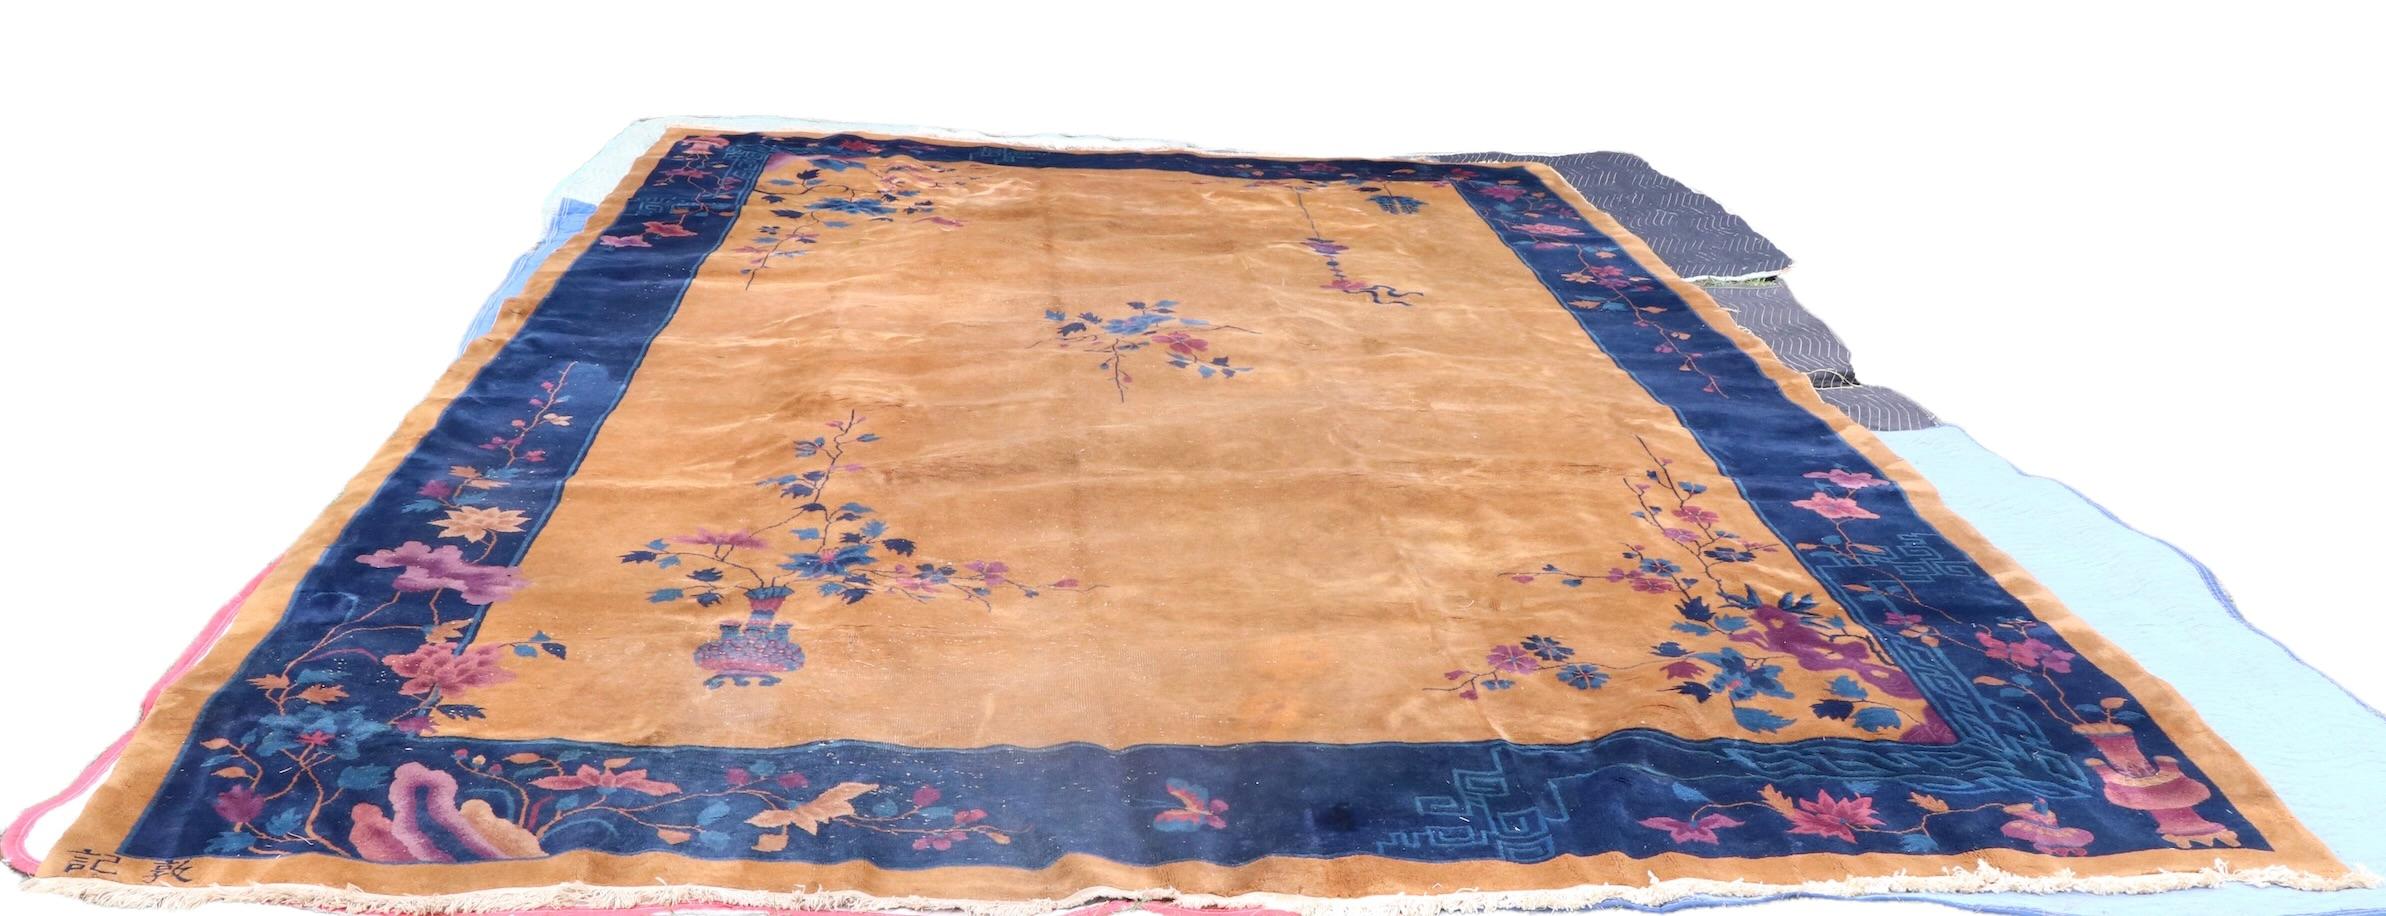  Palace Size Chinese Art Deco Rug att. to Walter Nichols ca. 1920/1930's For Sale 1